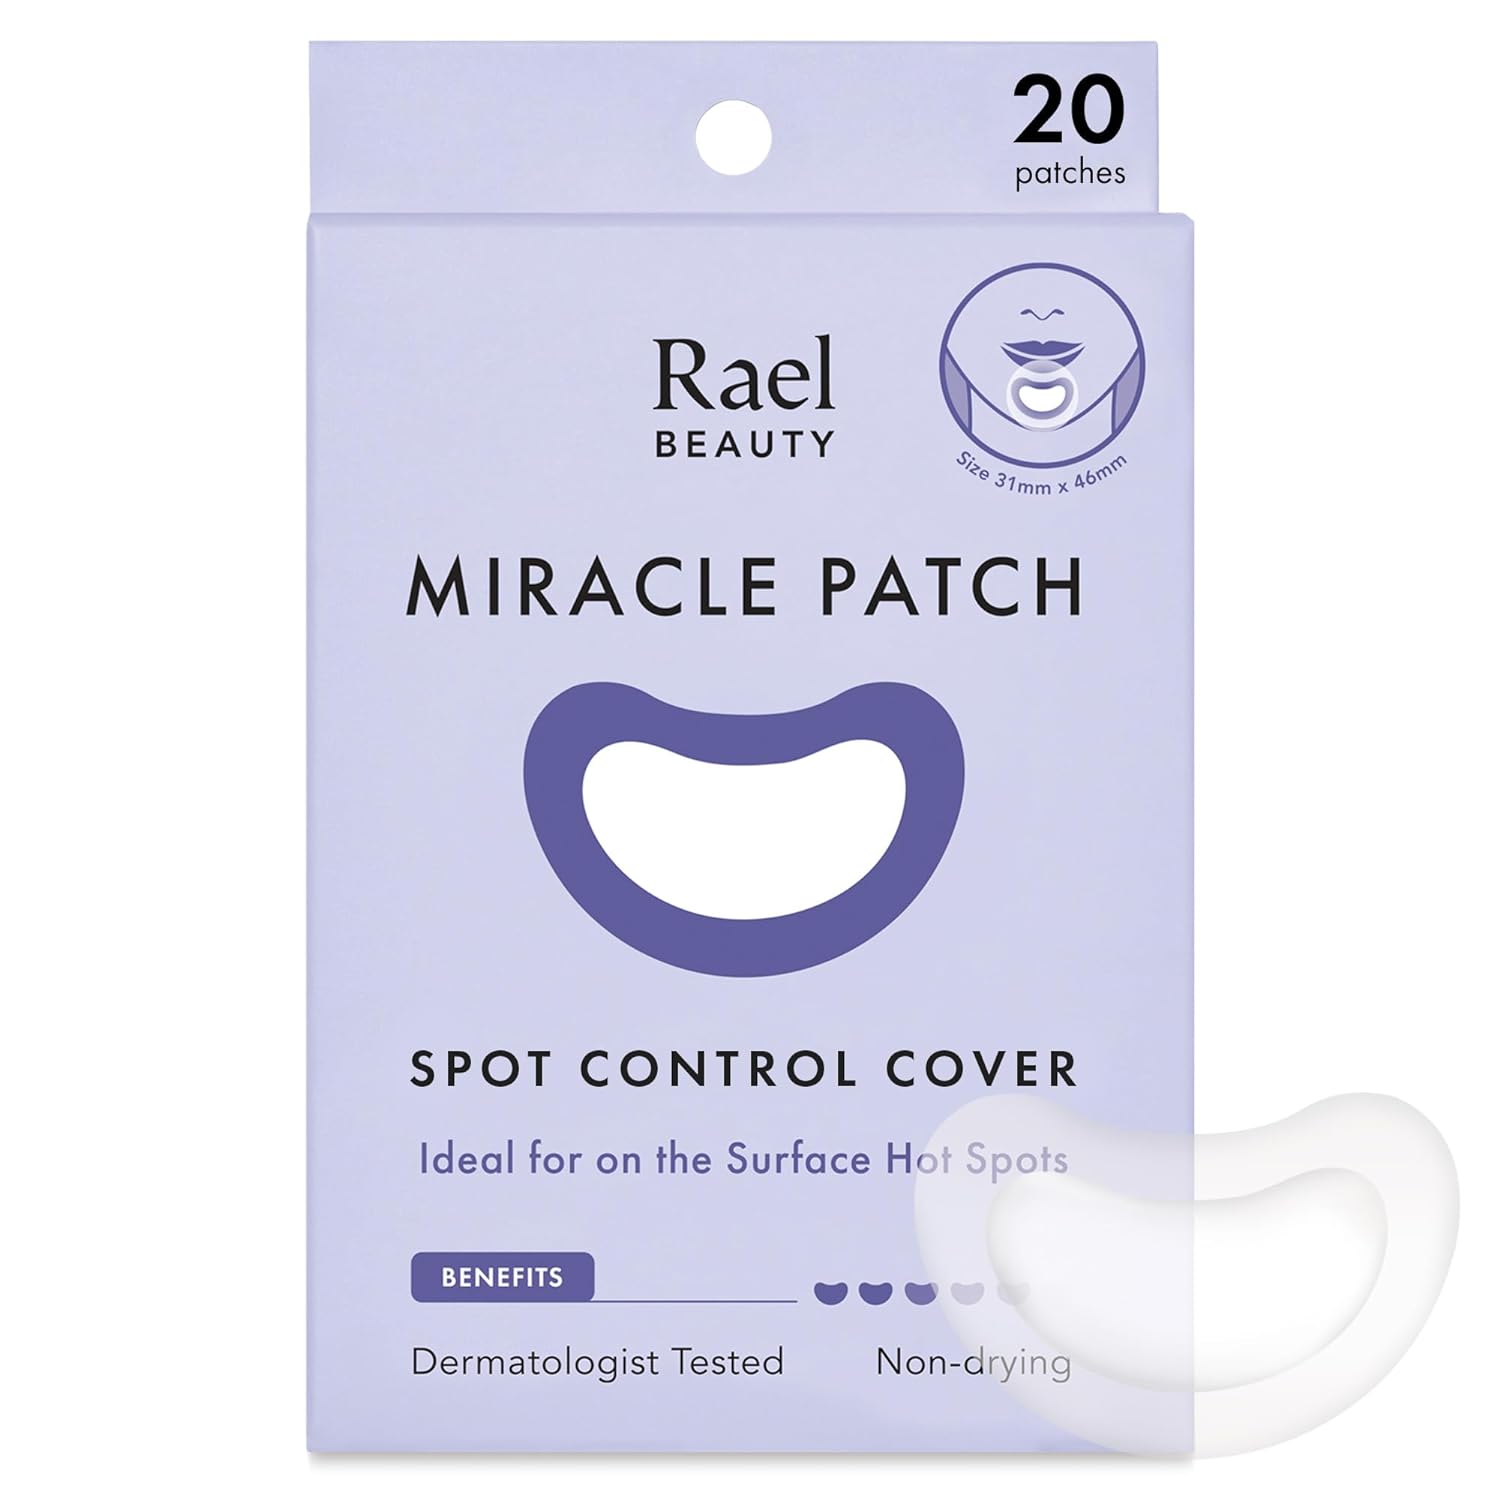 Rael Pimple Patches, Miracle Patches Large Spot Control Cover - Hydrocolloid Acne Patches for Face, Strip for Breakouts, Zit, Blemish Spot, Facial Stickers, All Skin Types, Vegan (20 Count)